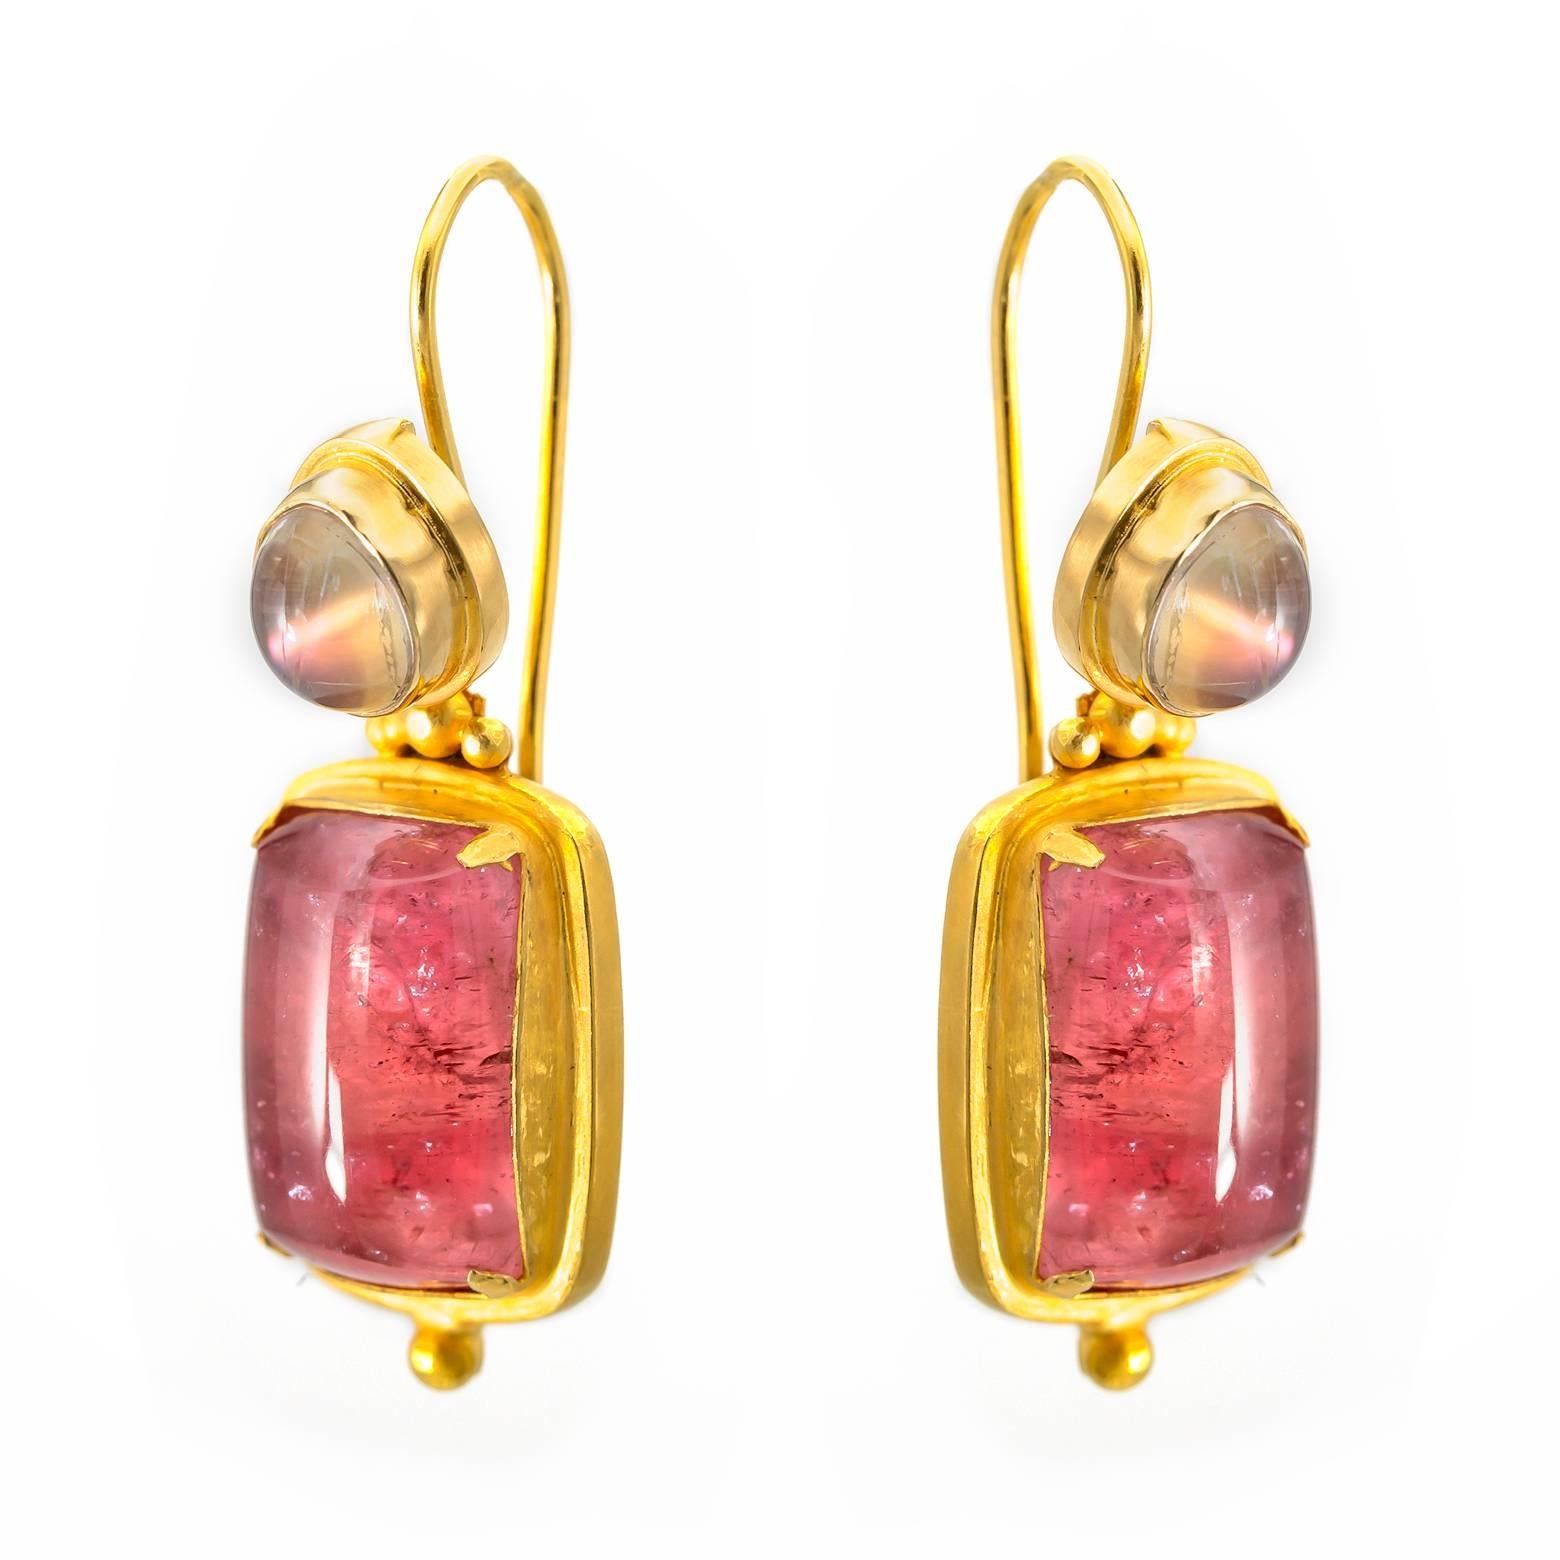 Detailed 18K yellow gold with small granulations adorn these bright strawberry tourmaline earrings with tear drop moonstones on top. The tourmaline's swing and sway and dance in their beautiful candy-like color in an artistic fashion!